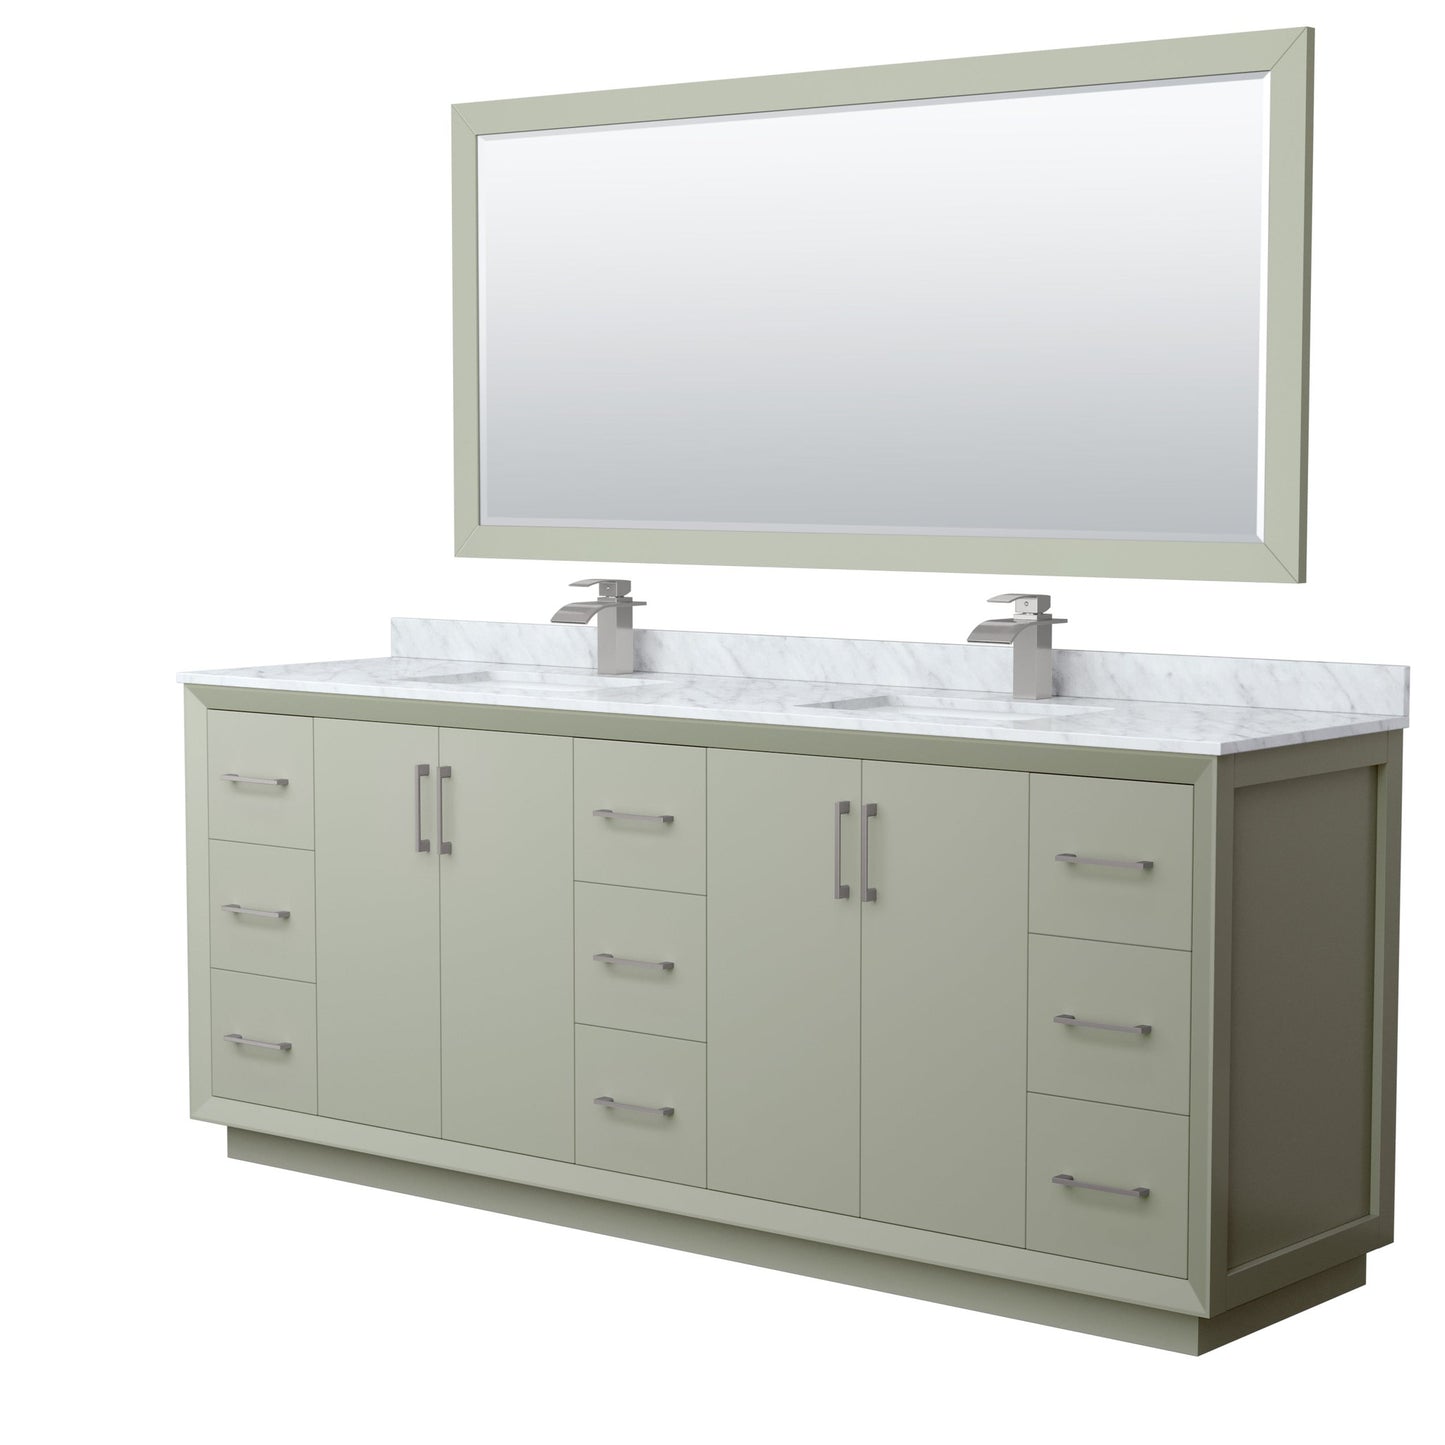 Wyndham Collection Strada 84" Double Bathroom Vanity in Light Green, White Carrara Marble Countertop, Undermount Square Sinks, Brushed Nickel Trim, 70" Mirror